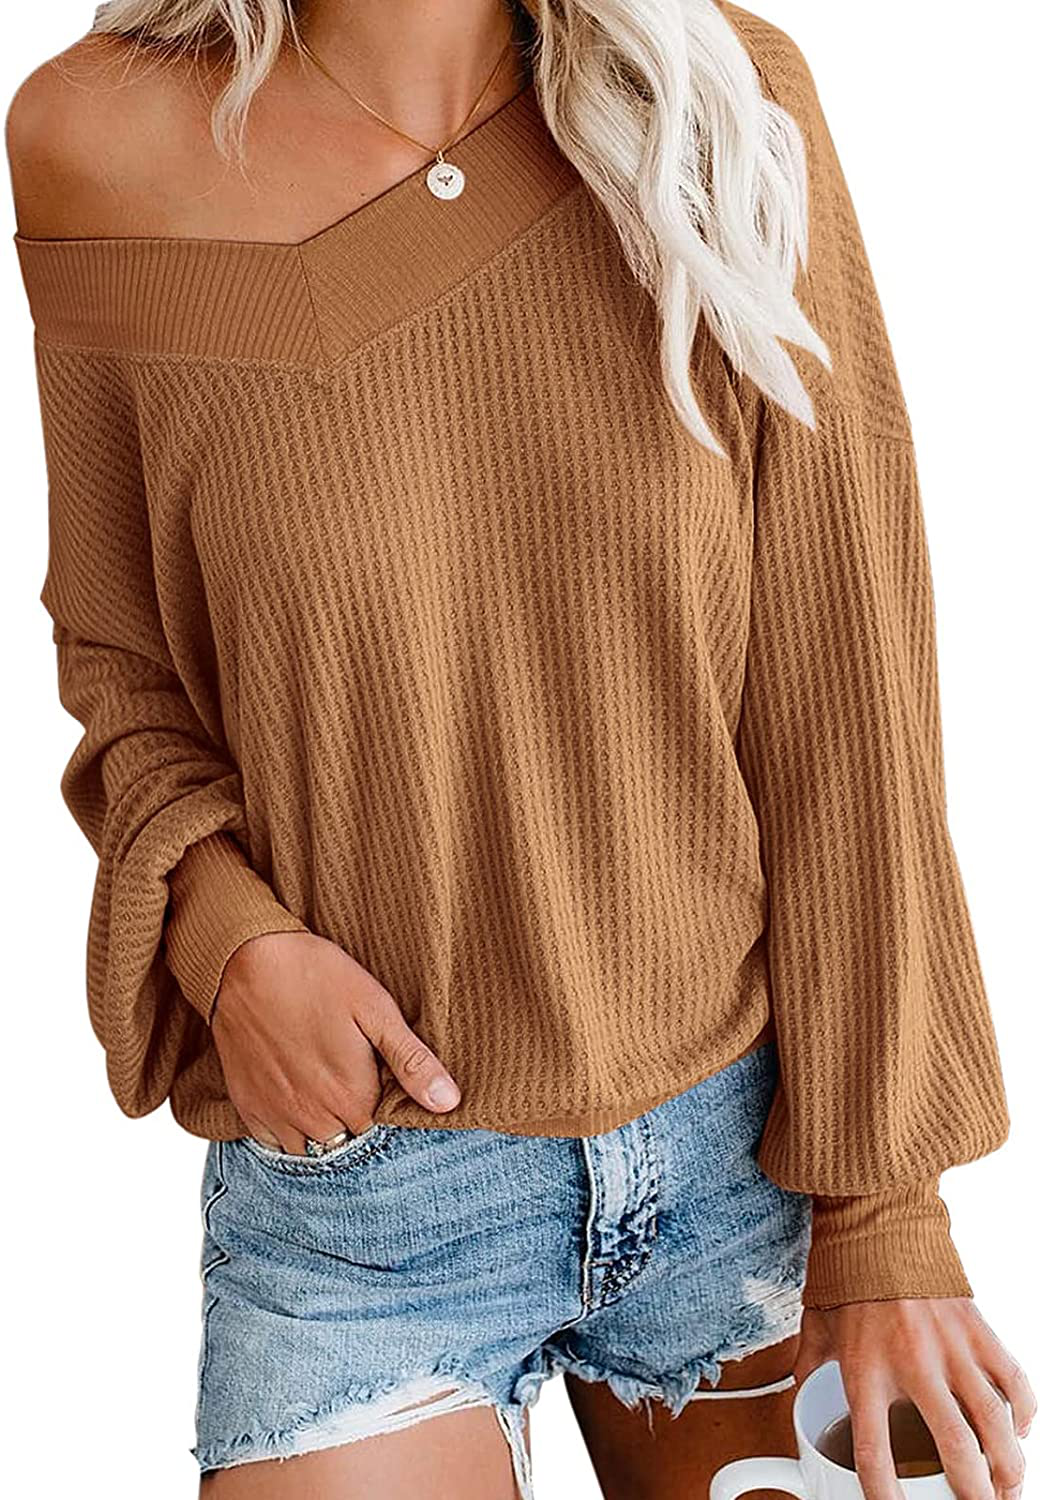 Adreamly Women's V Neck Long Sleeve Waffle Knit Top Off Shoulder Oversized Pullover Sweater